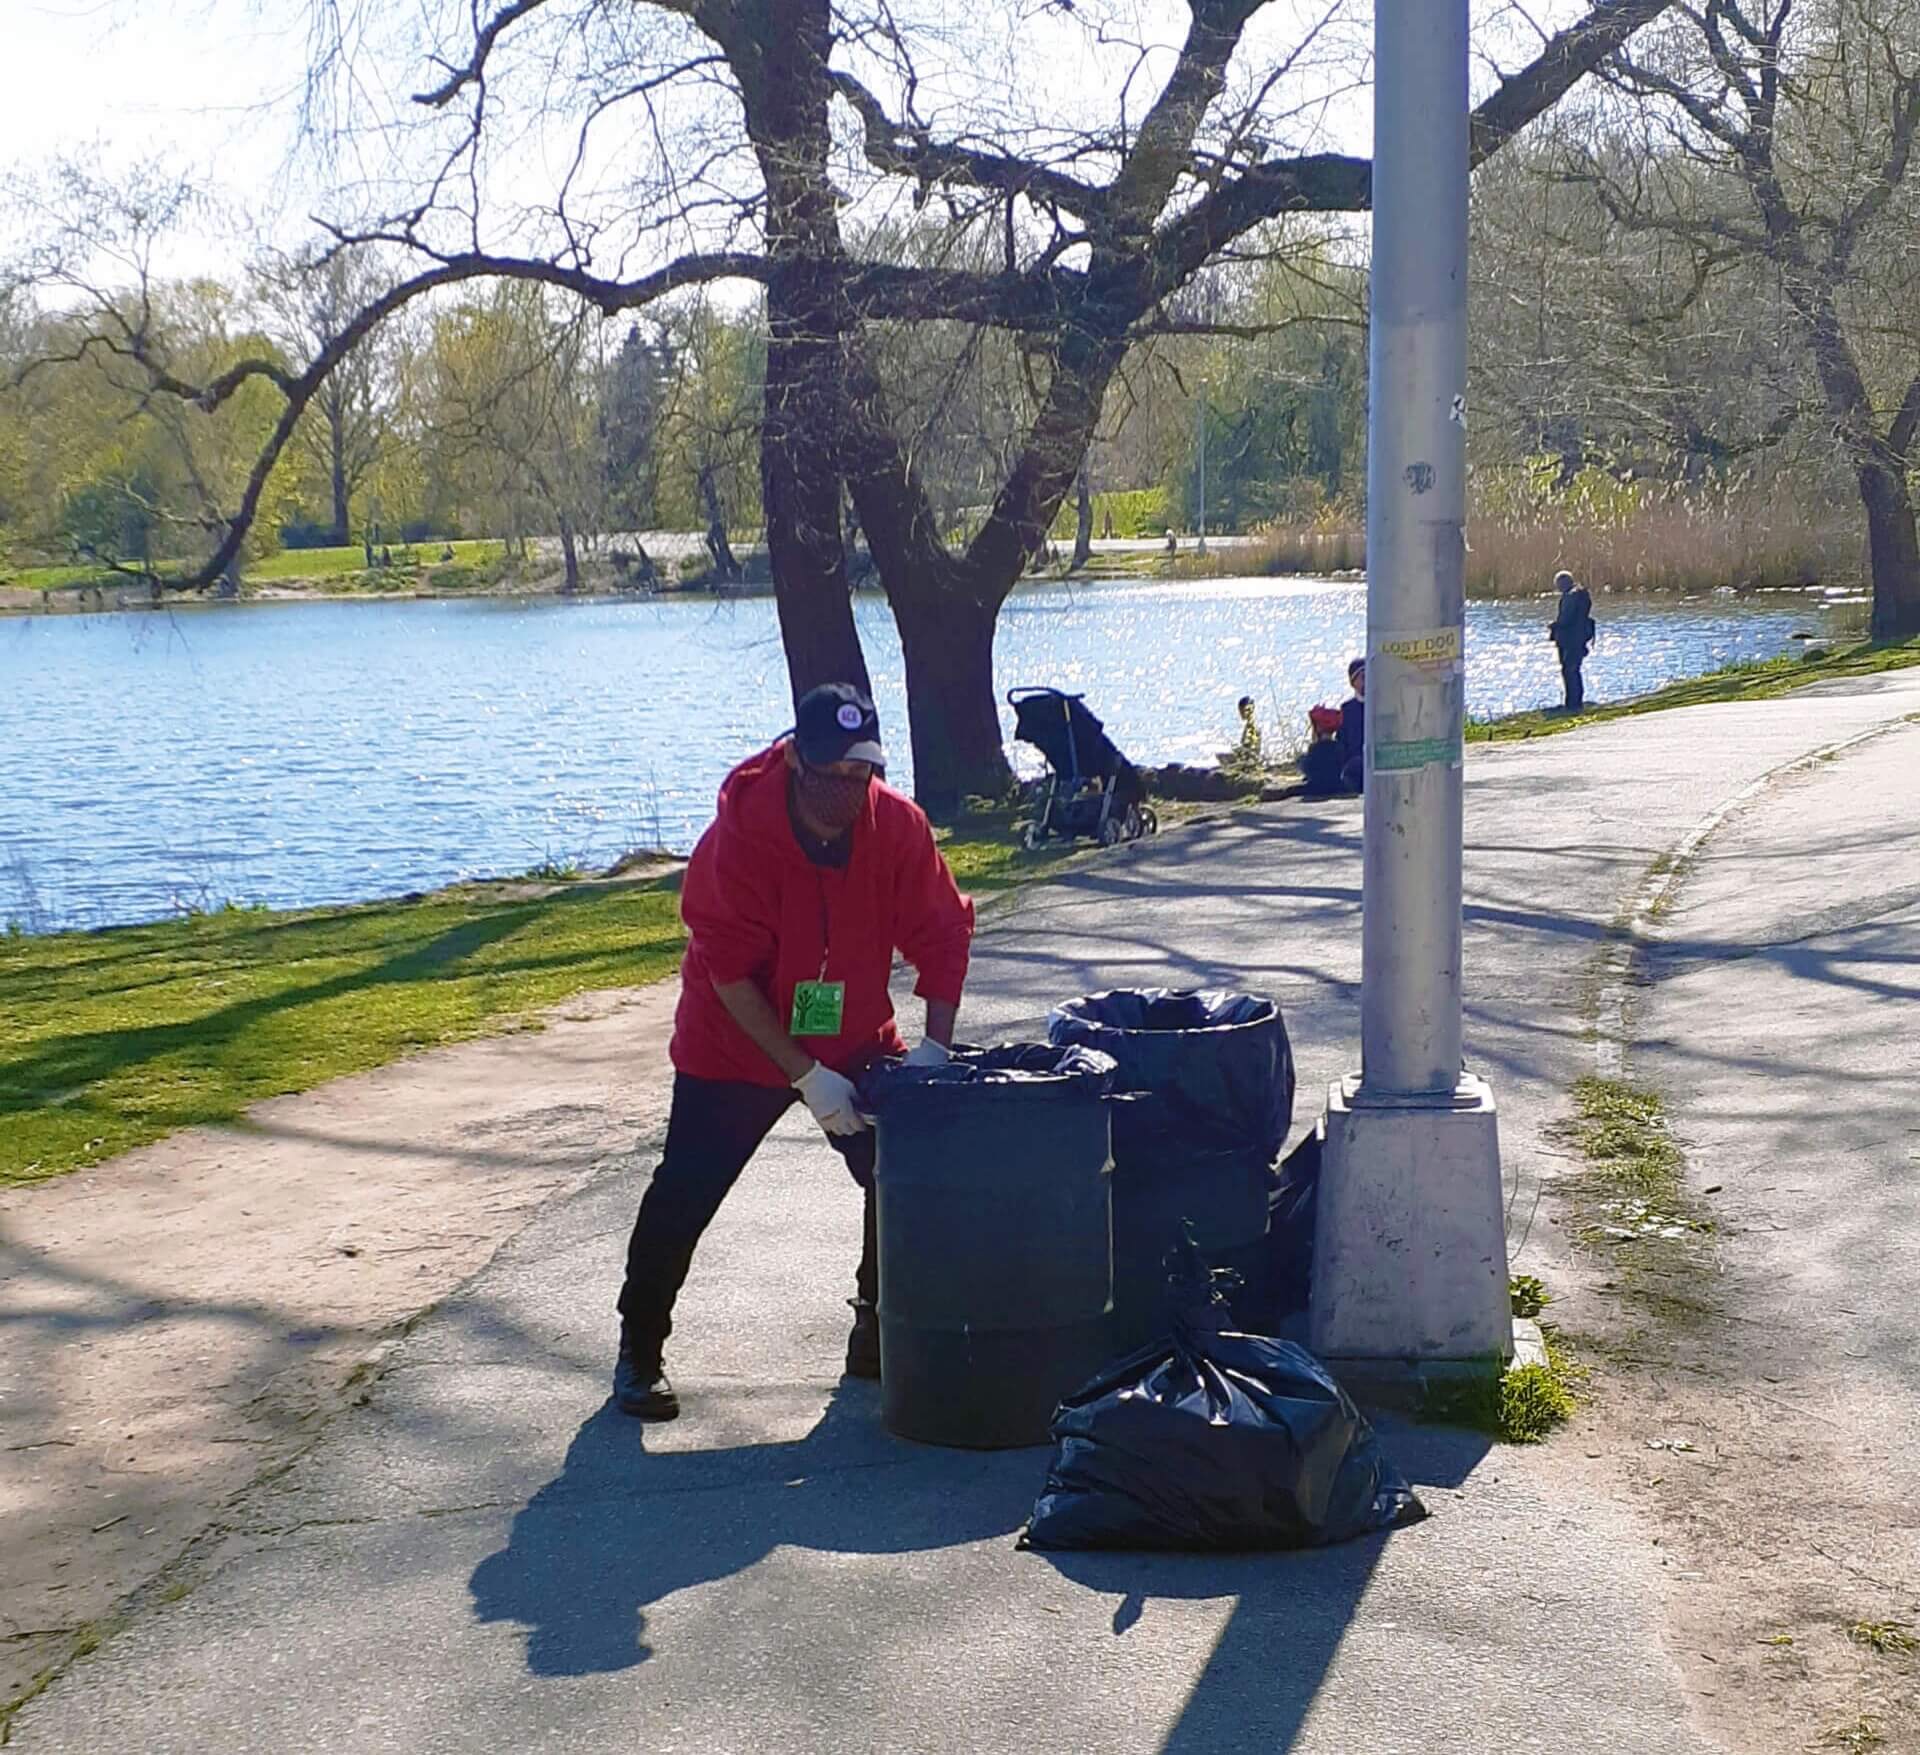 cleanup in prospect park